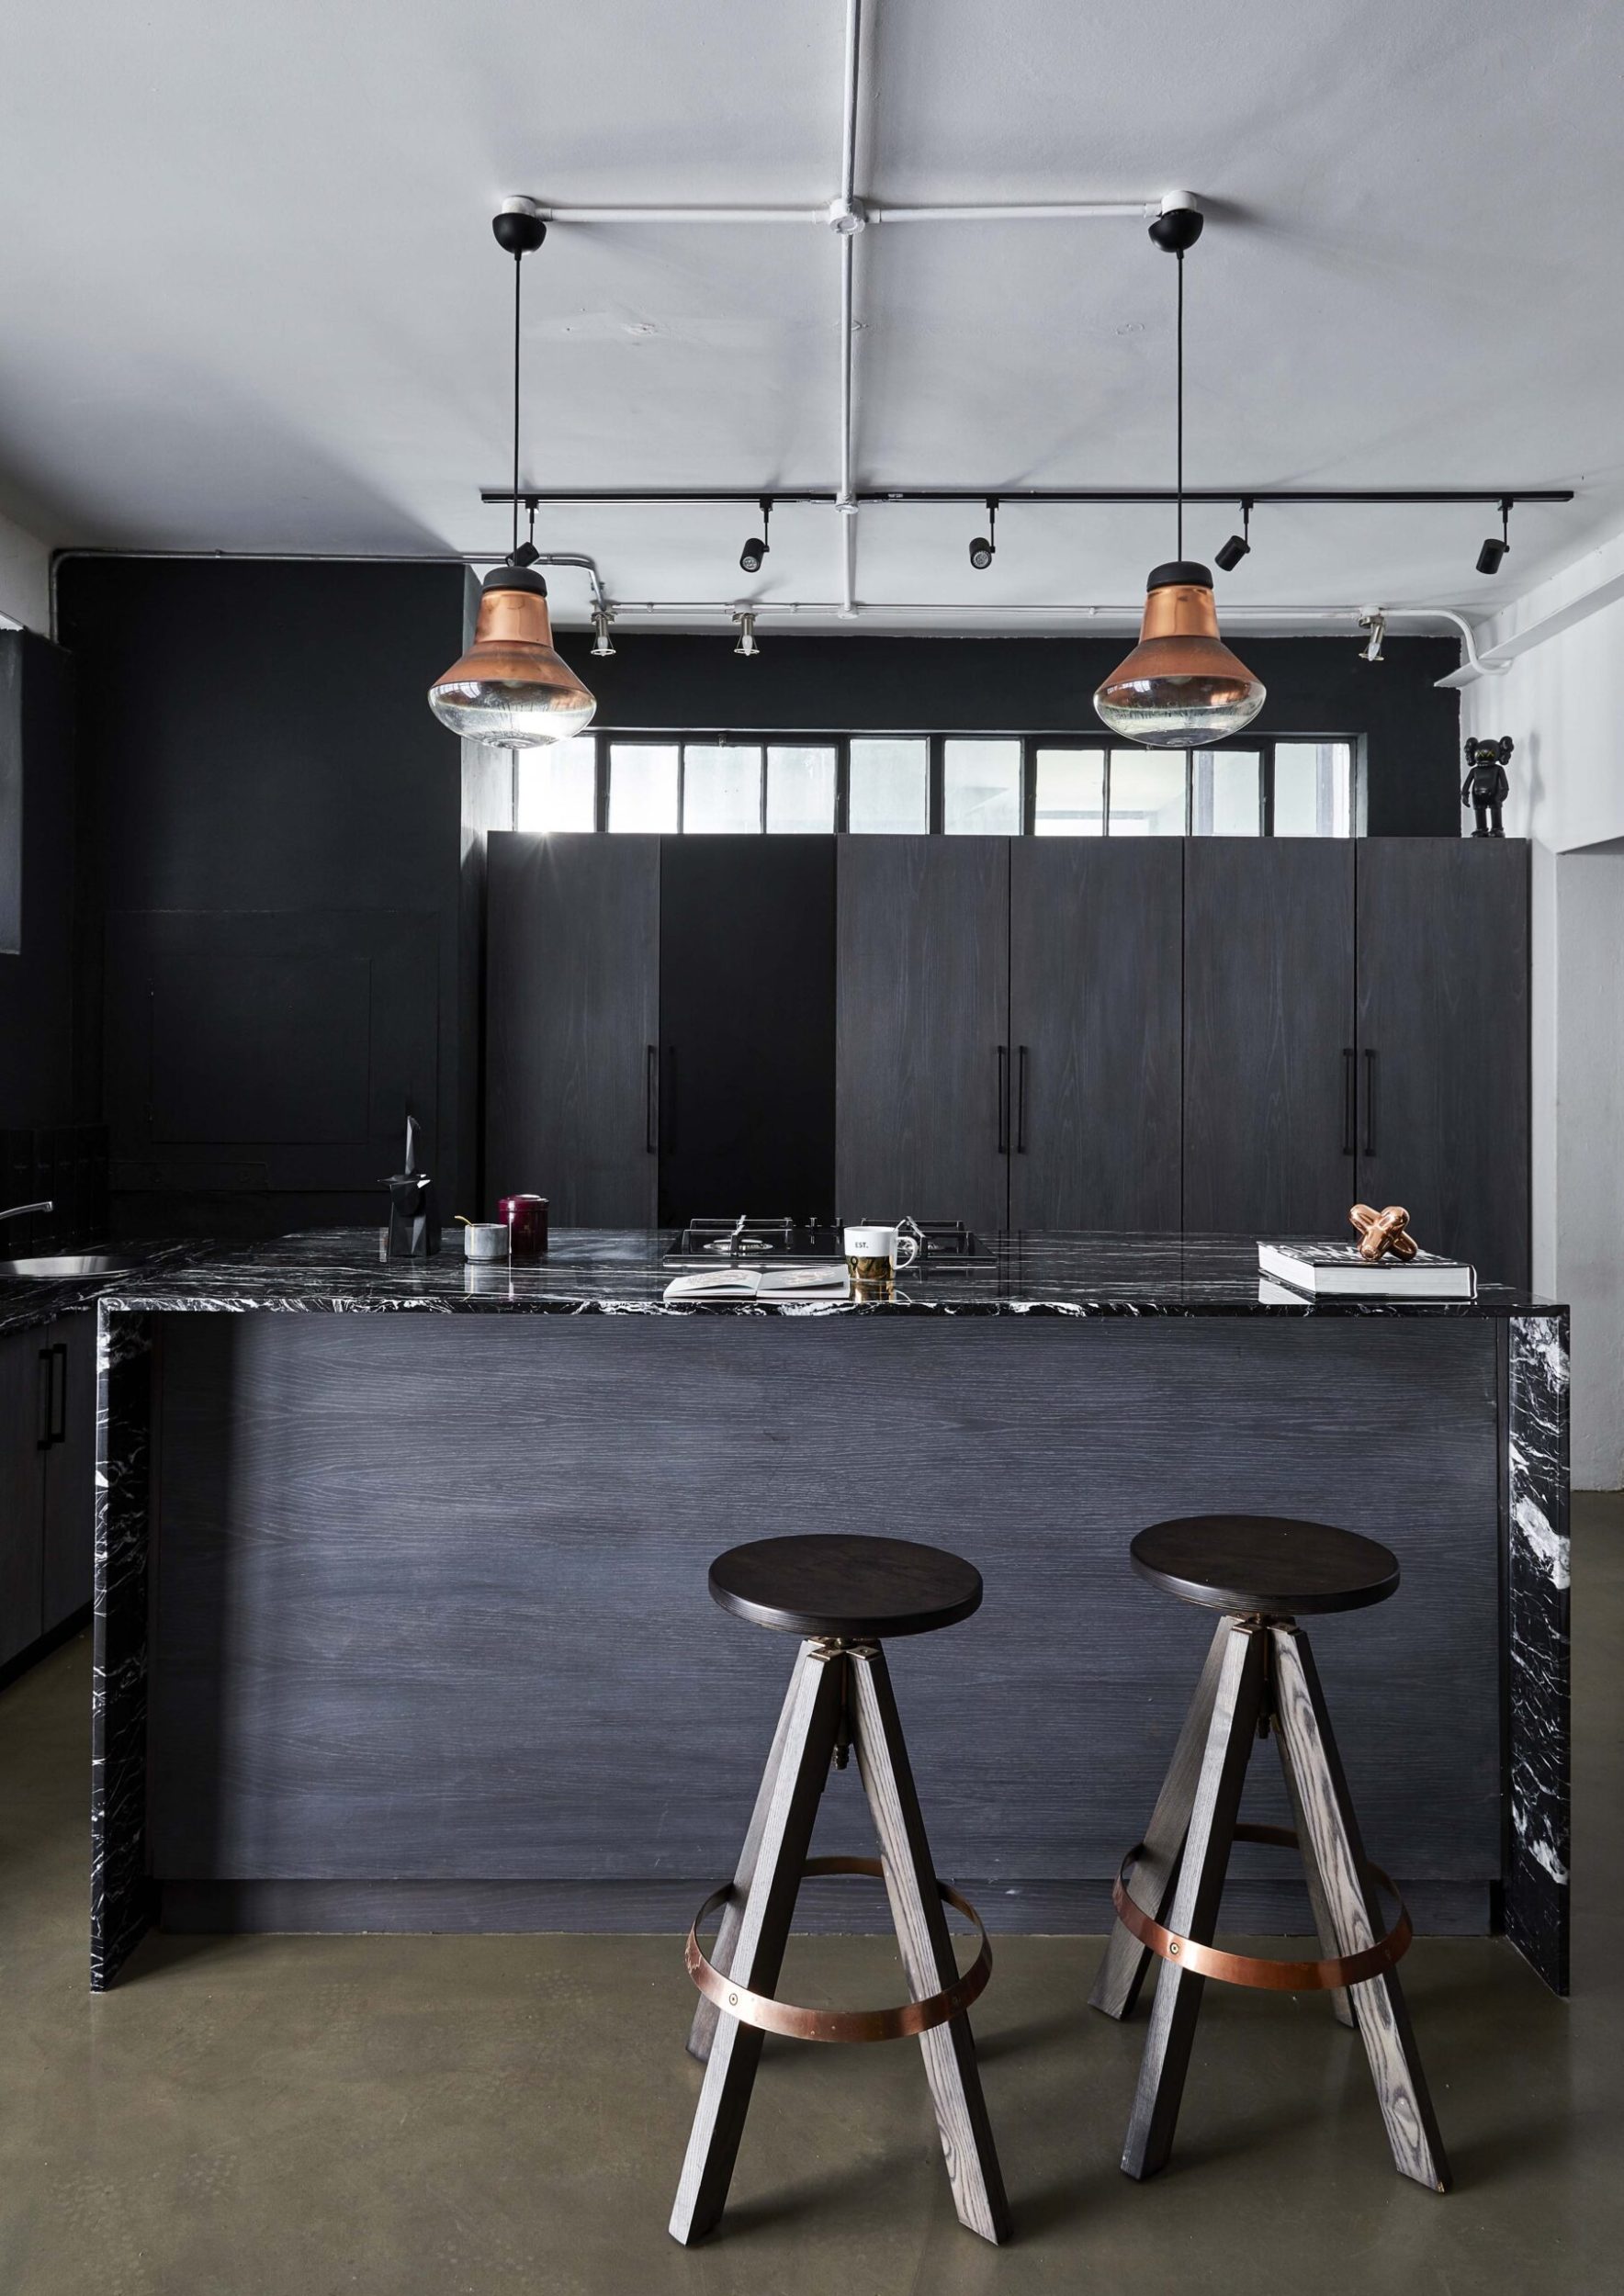 A black kitchen with white ceilings and brass hanging lamps